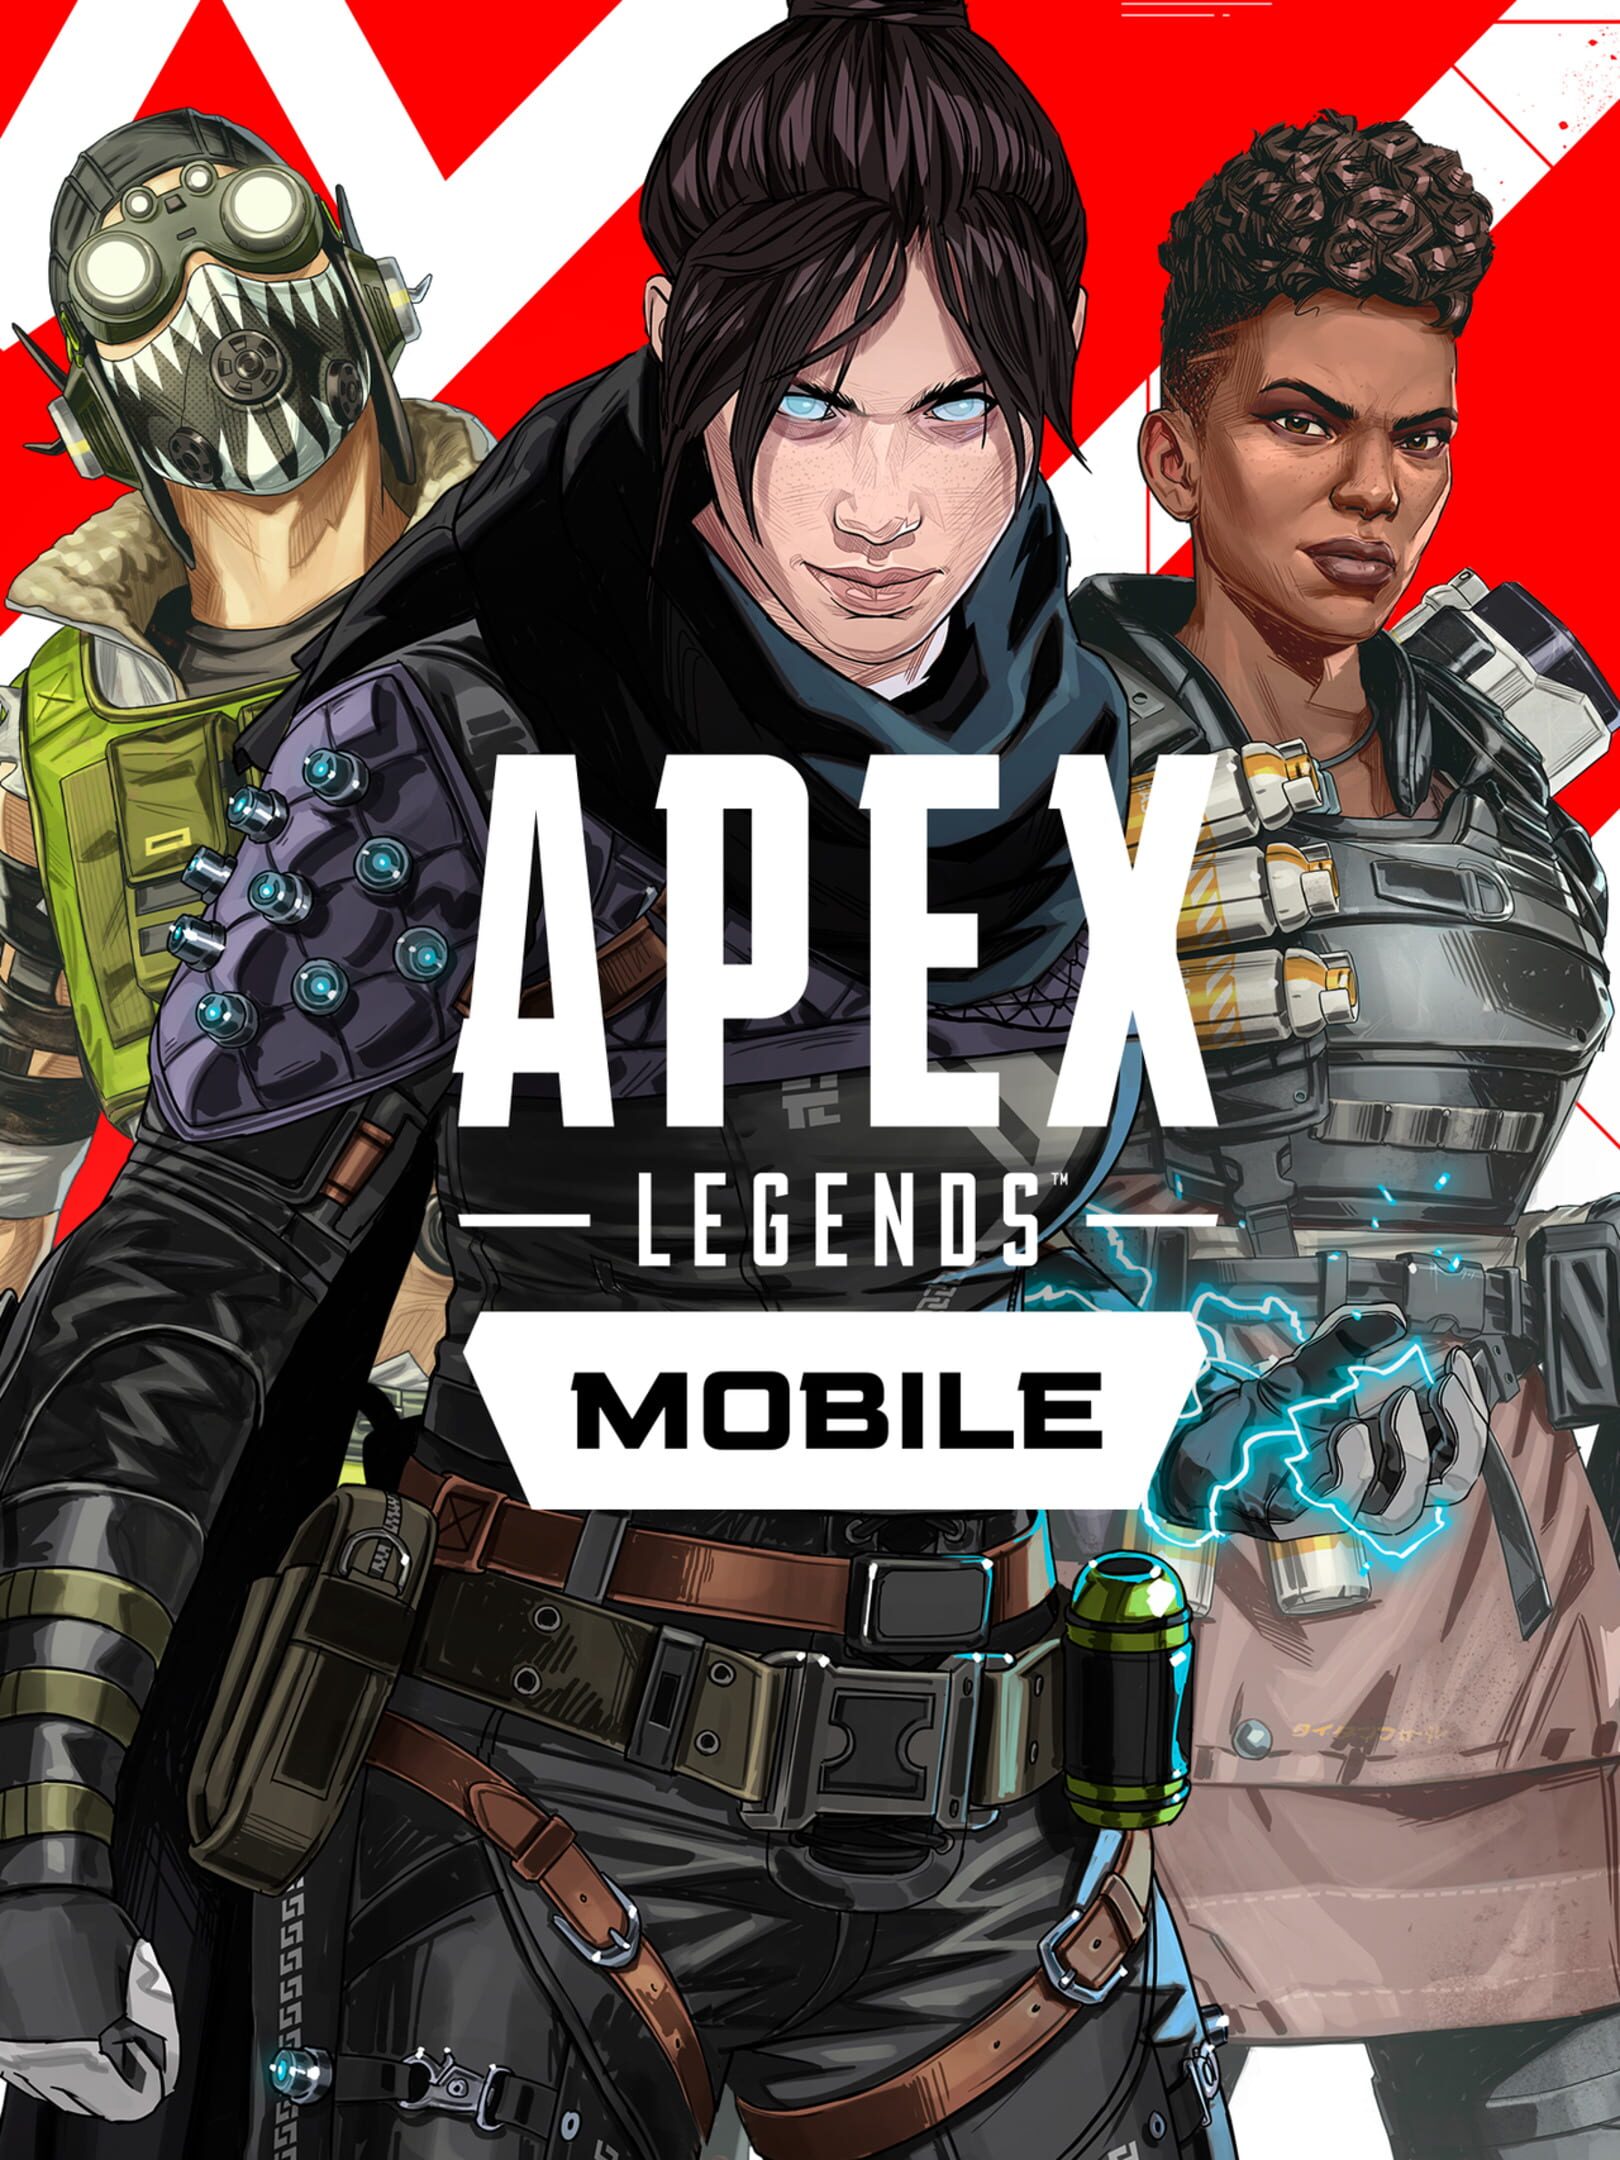 EA is shutting down Apex Legends Mobile and not giving refunds